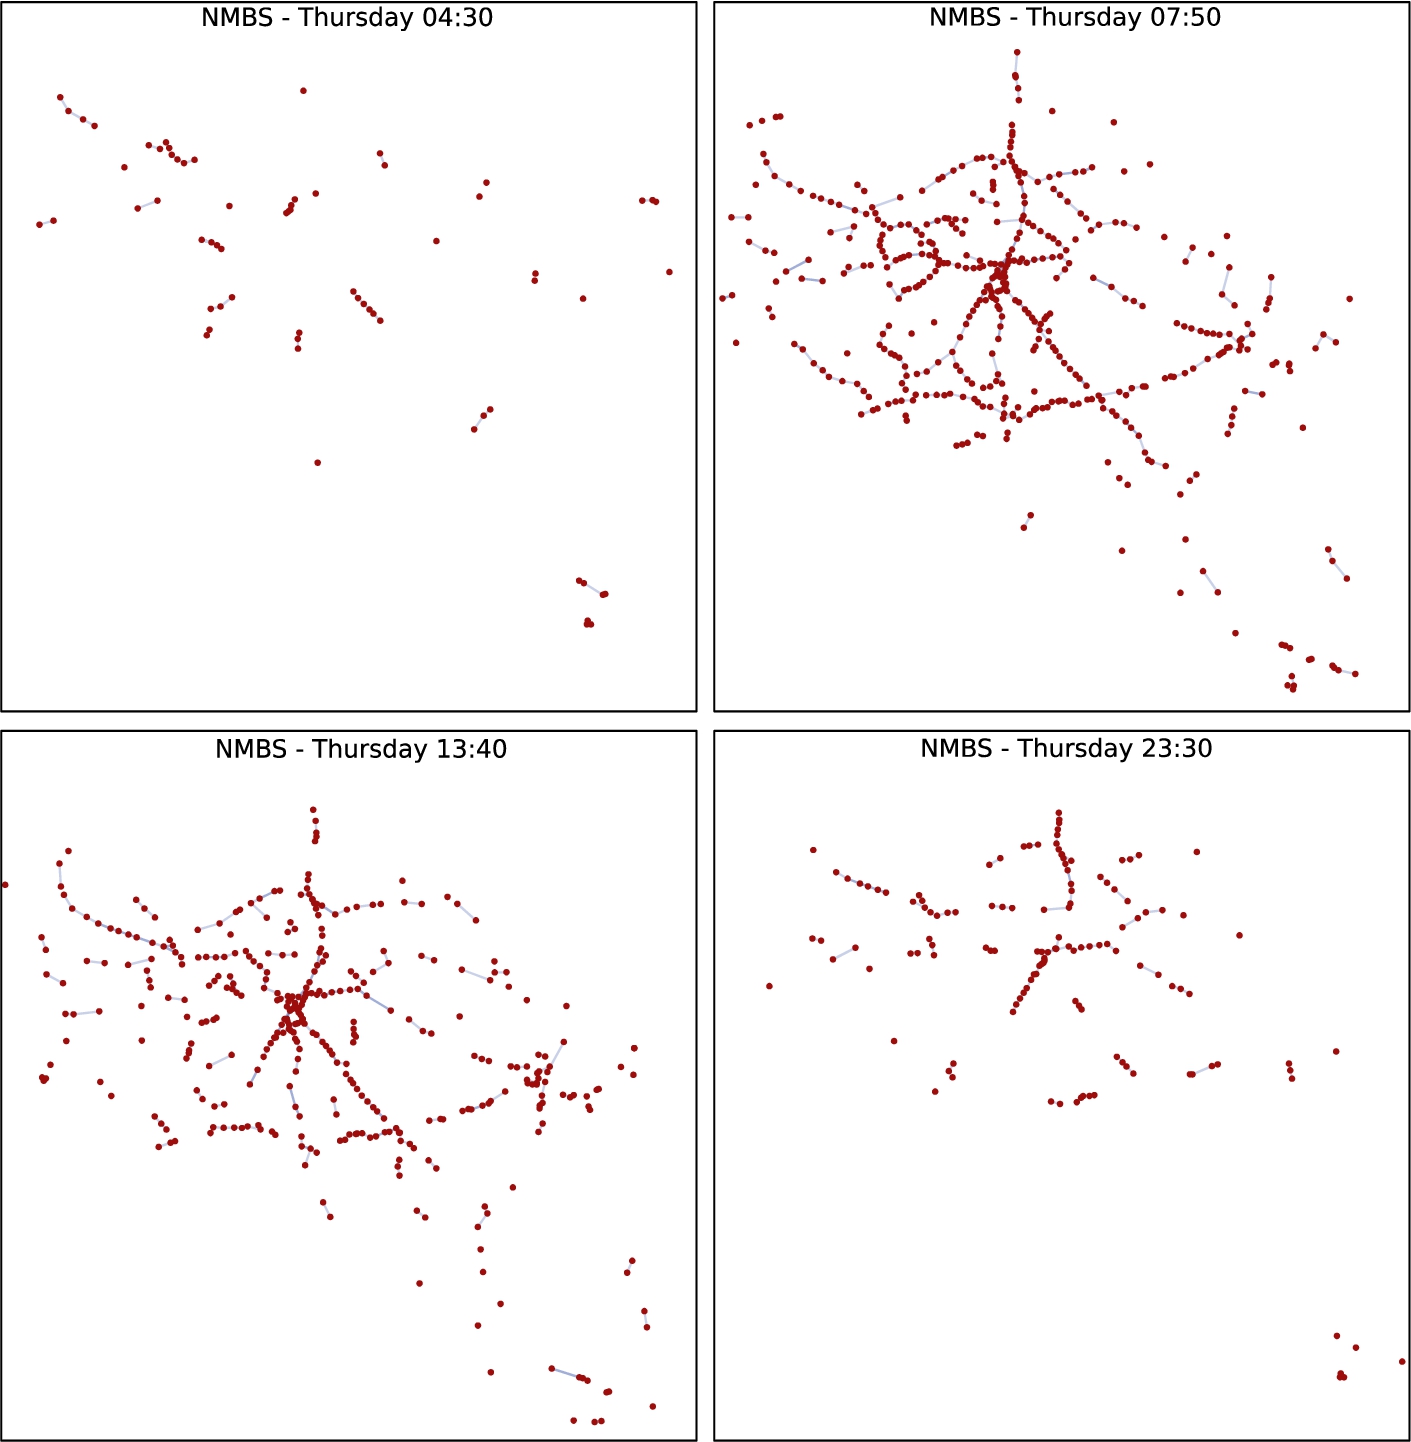 Network graph snapshots of the Belgian train pt operator NMBS, taken over the busiest day of their timetable. It can be observed how the topological structure of the network varies throughout the day, in particular showing a higher amount of connections between stops during peak hours.